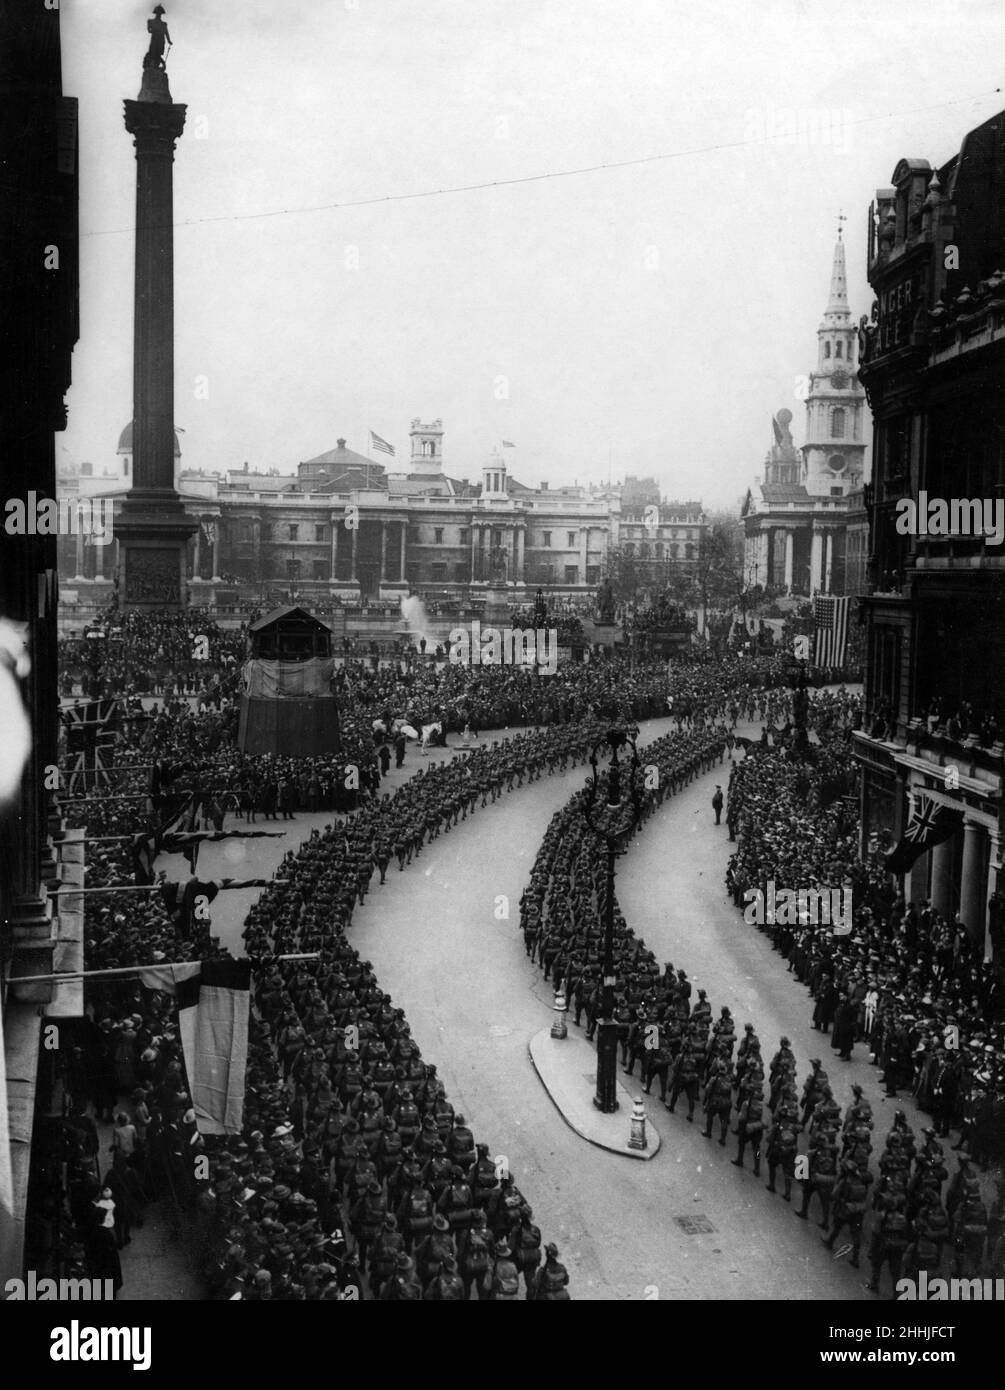 London Victory Parade also known as the Peace Day Parade on 19th July 1919, to mark the formal end of the First World War that had taken place with the signing of the Treaty of Versailles, France the previous month on 28 June 1919. Picture shows, Colonial Troops, Overseas Troops marching up Whitehall, London, in  double column. Stock Photo